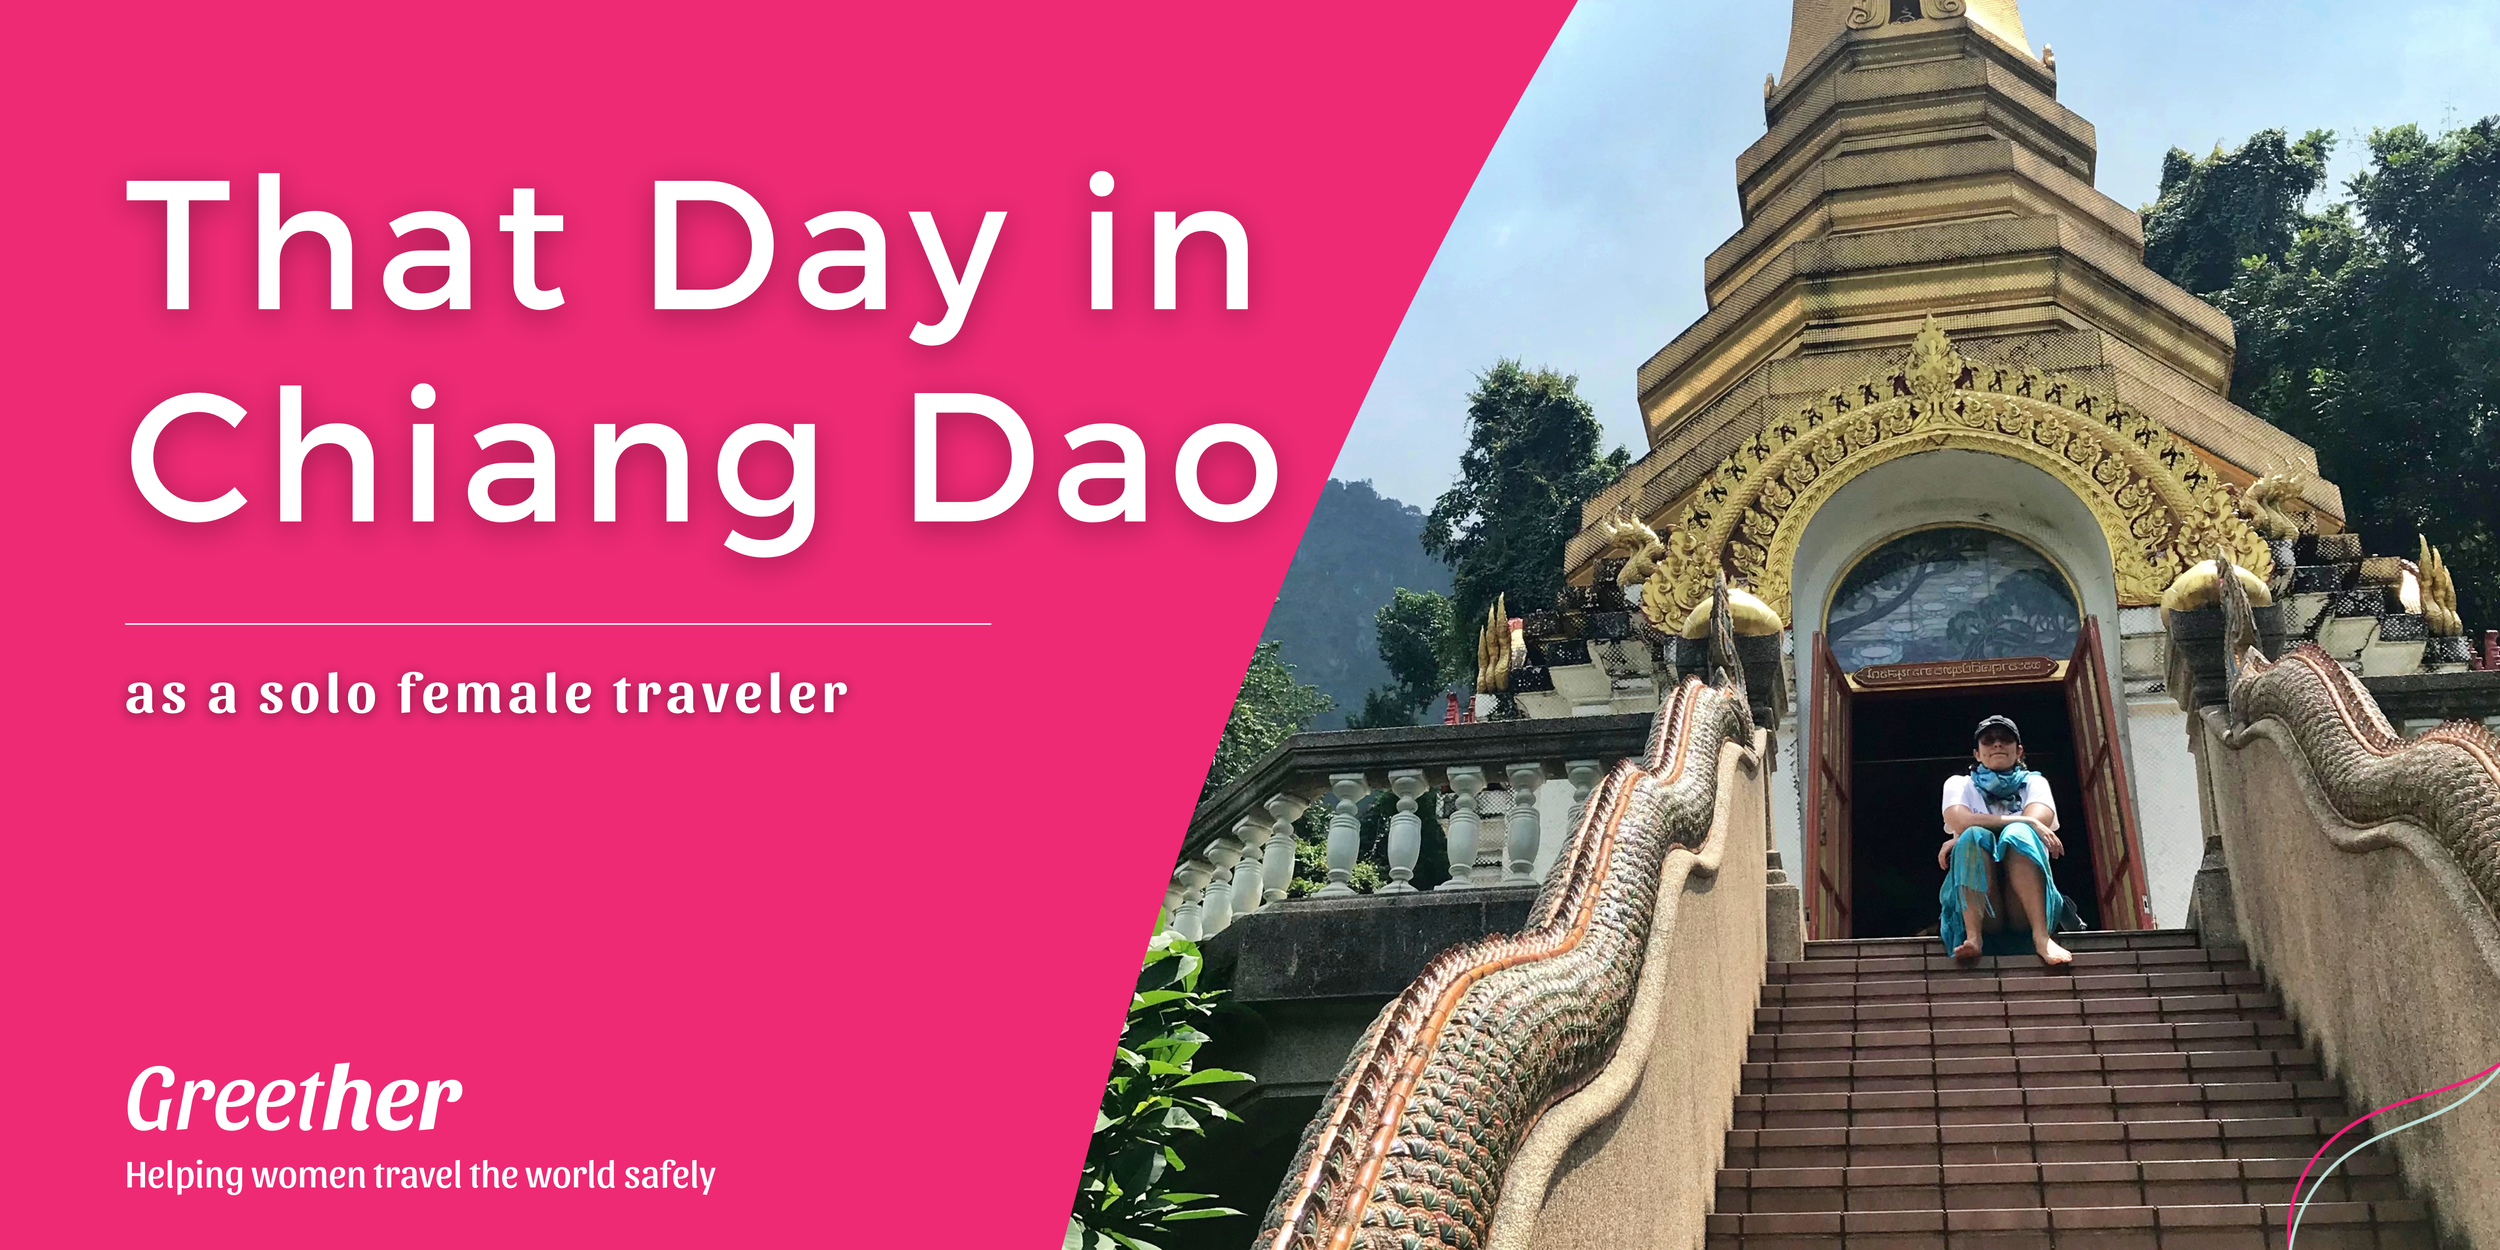 A day in Chiang Dao Thailand as a solo female traveler